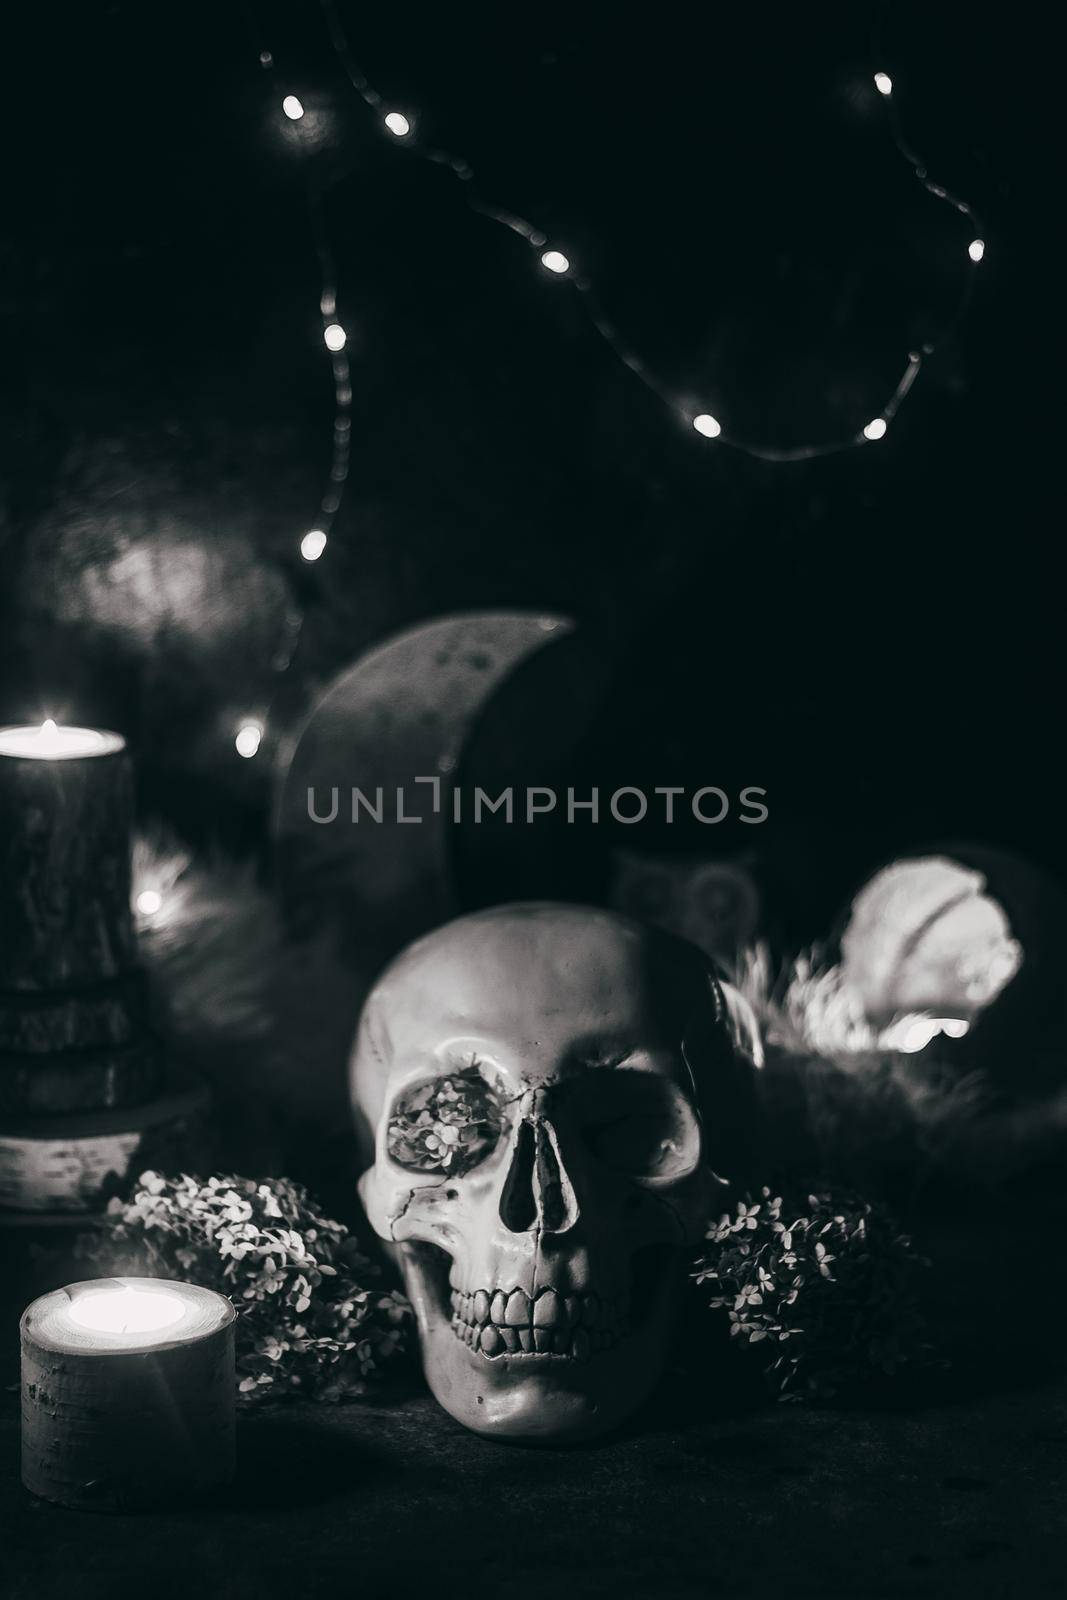 Occult mystic ritual halloween witchcraft scene - human scull, candles, dried flowers, moon and owl. Black and white photo.